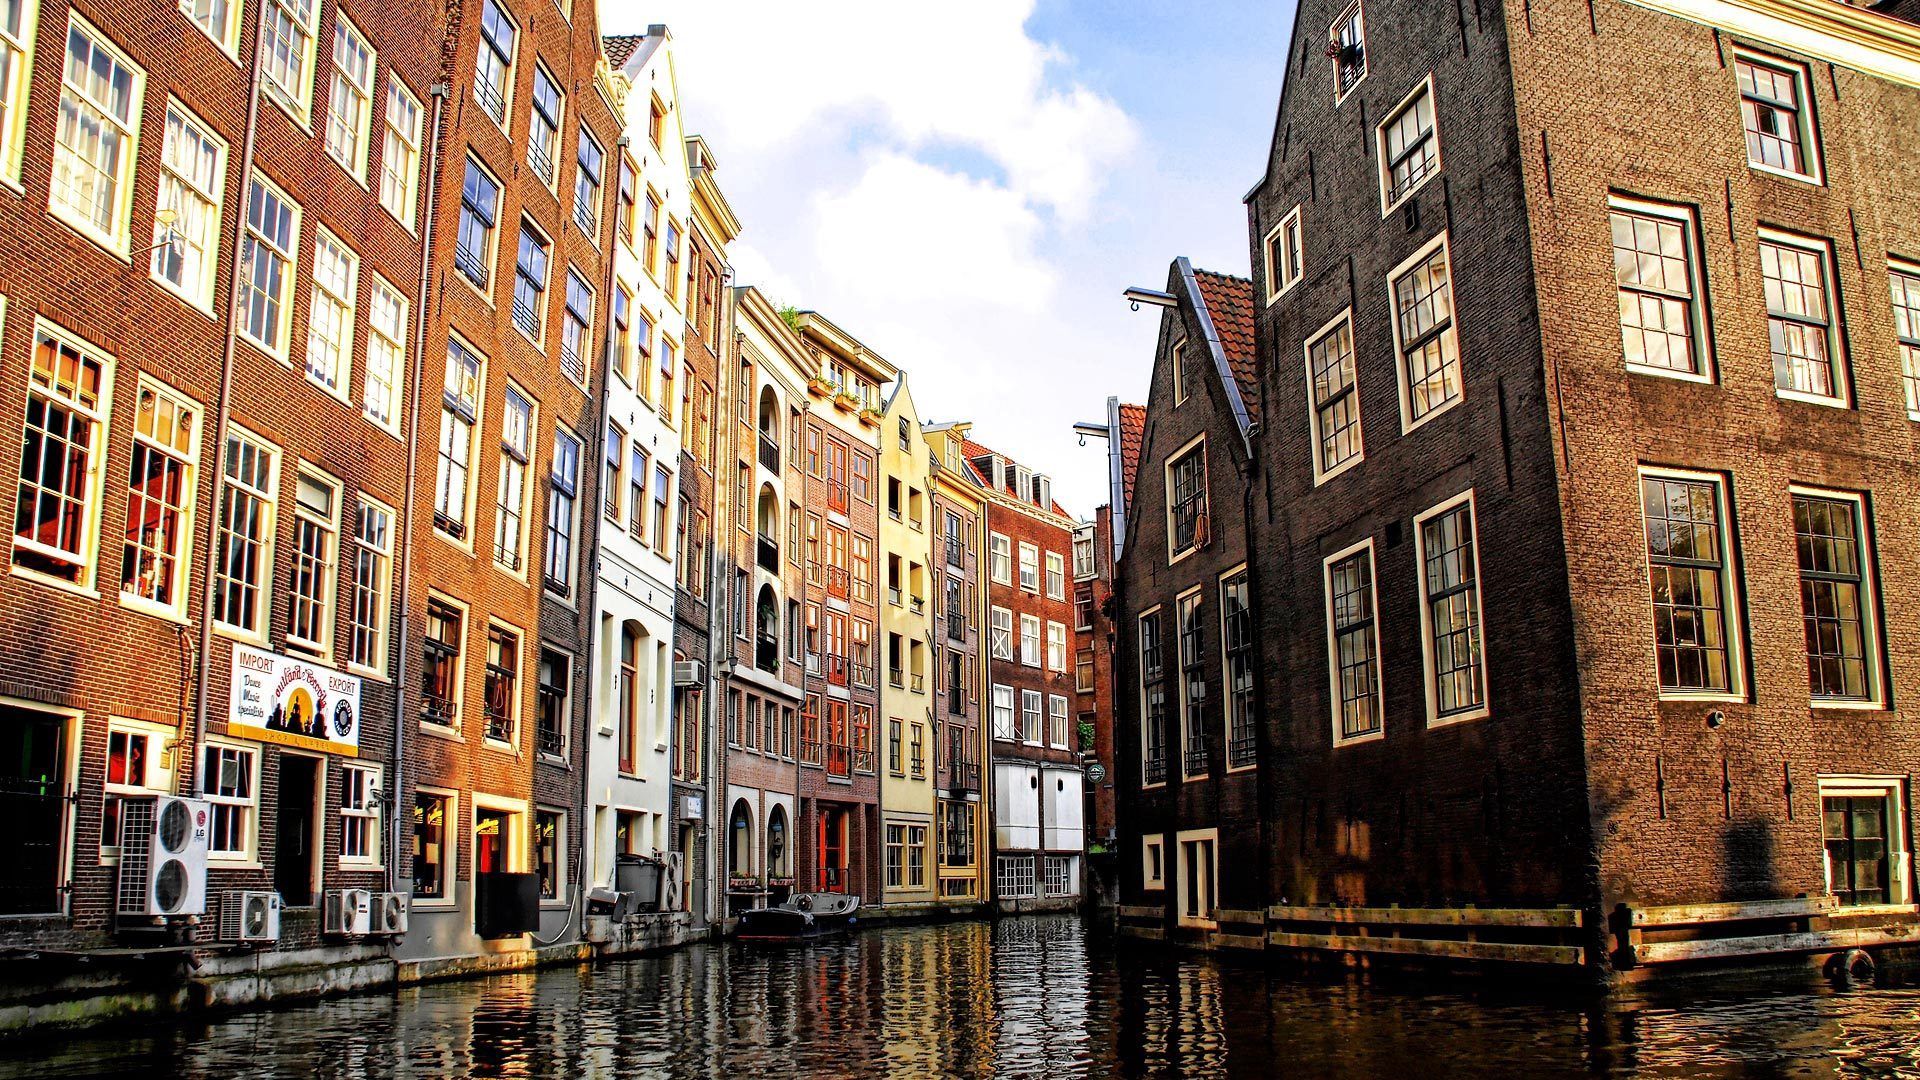 Download wallpaper 1920x1080 amsterdam, venetian canal, houses, buildings,  city full hd, hdtv, fhd, 1080p hd background